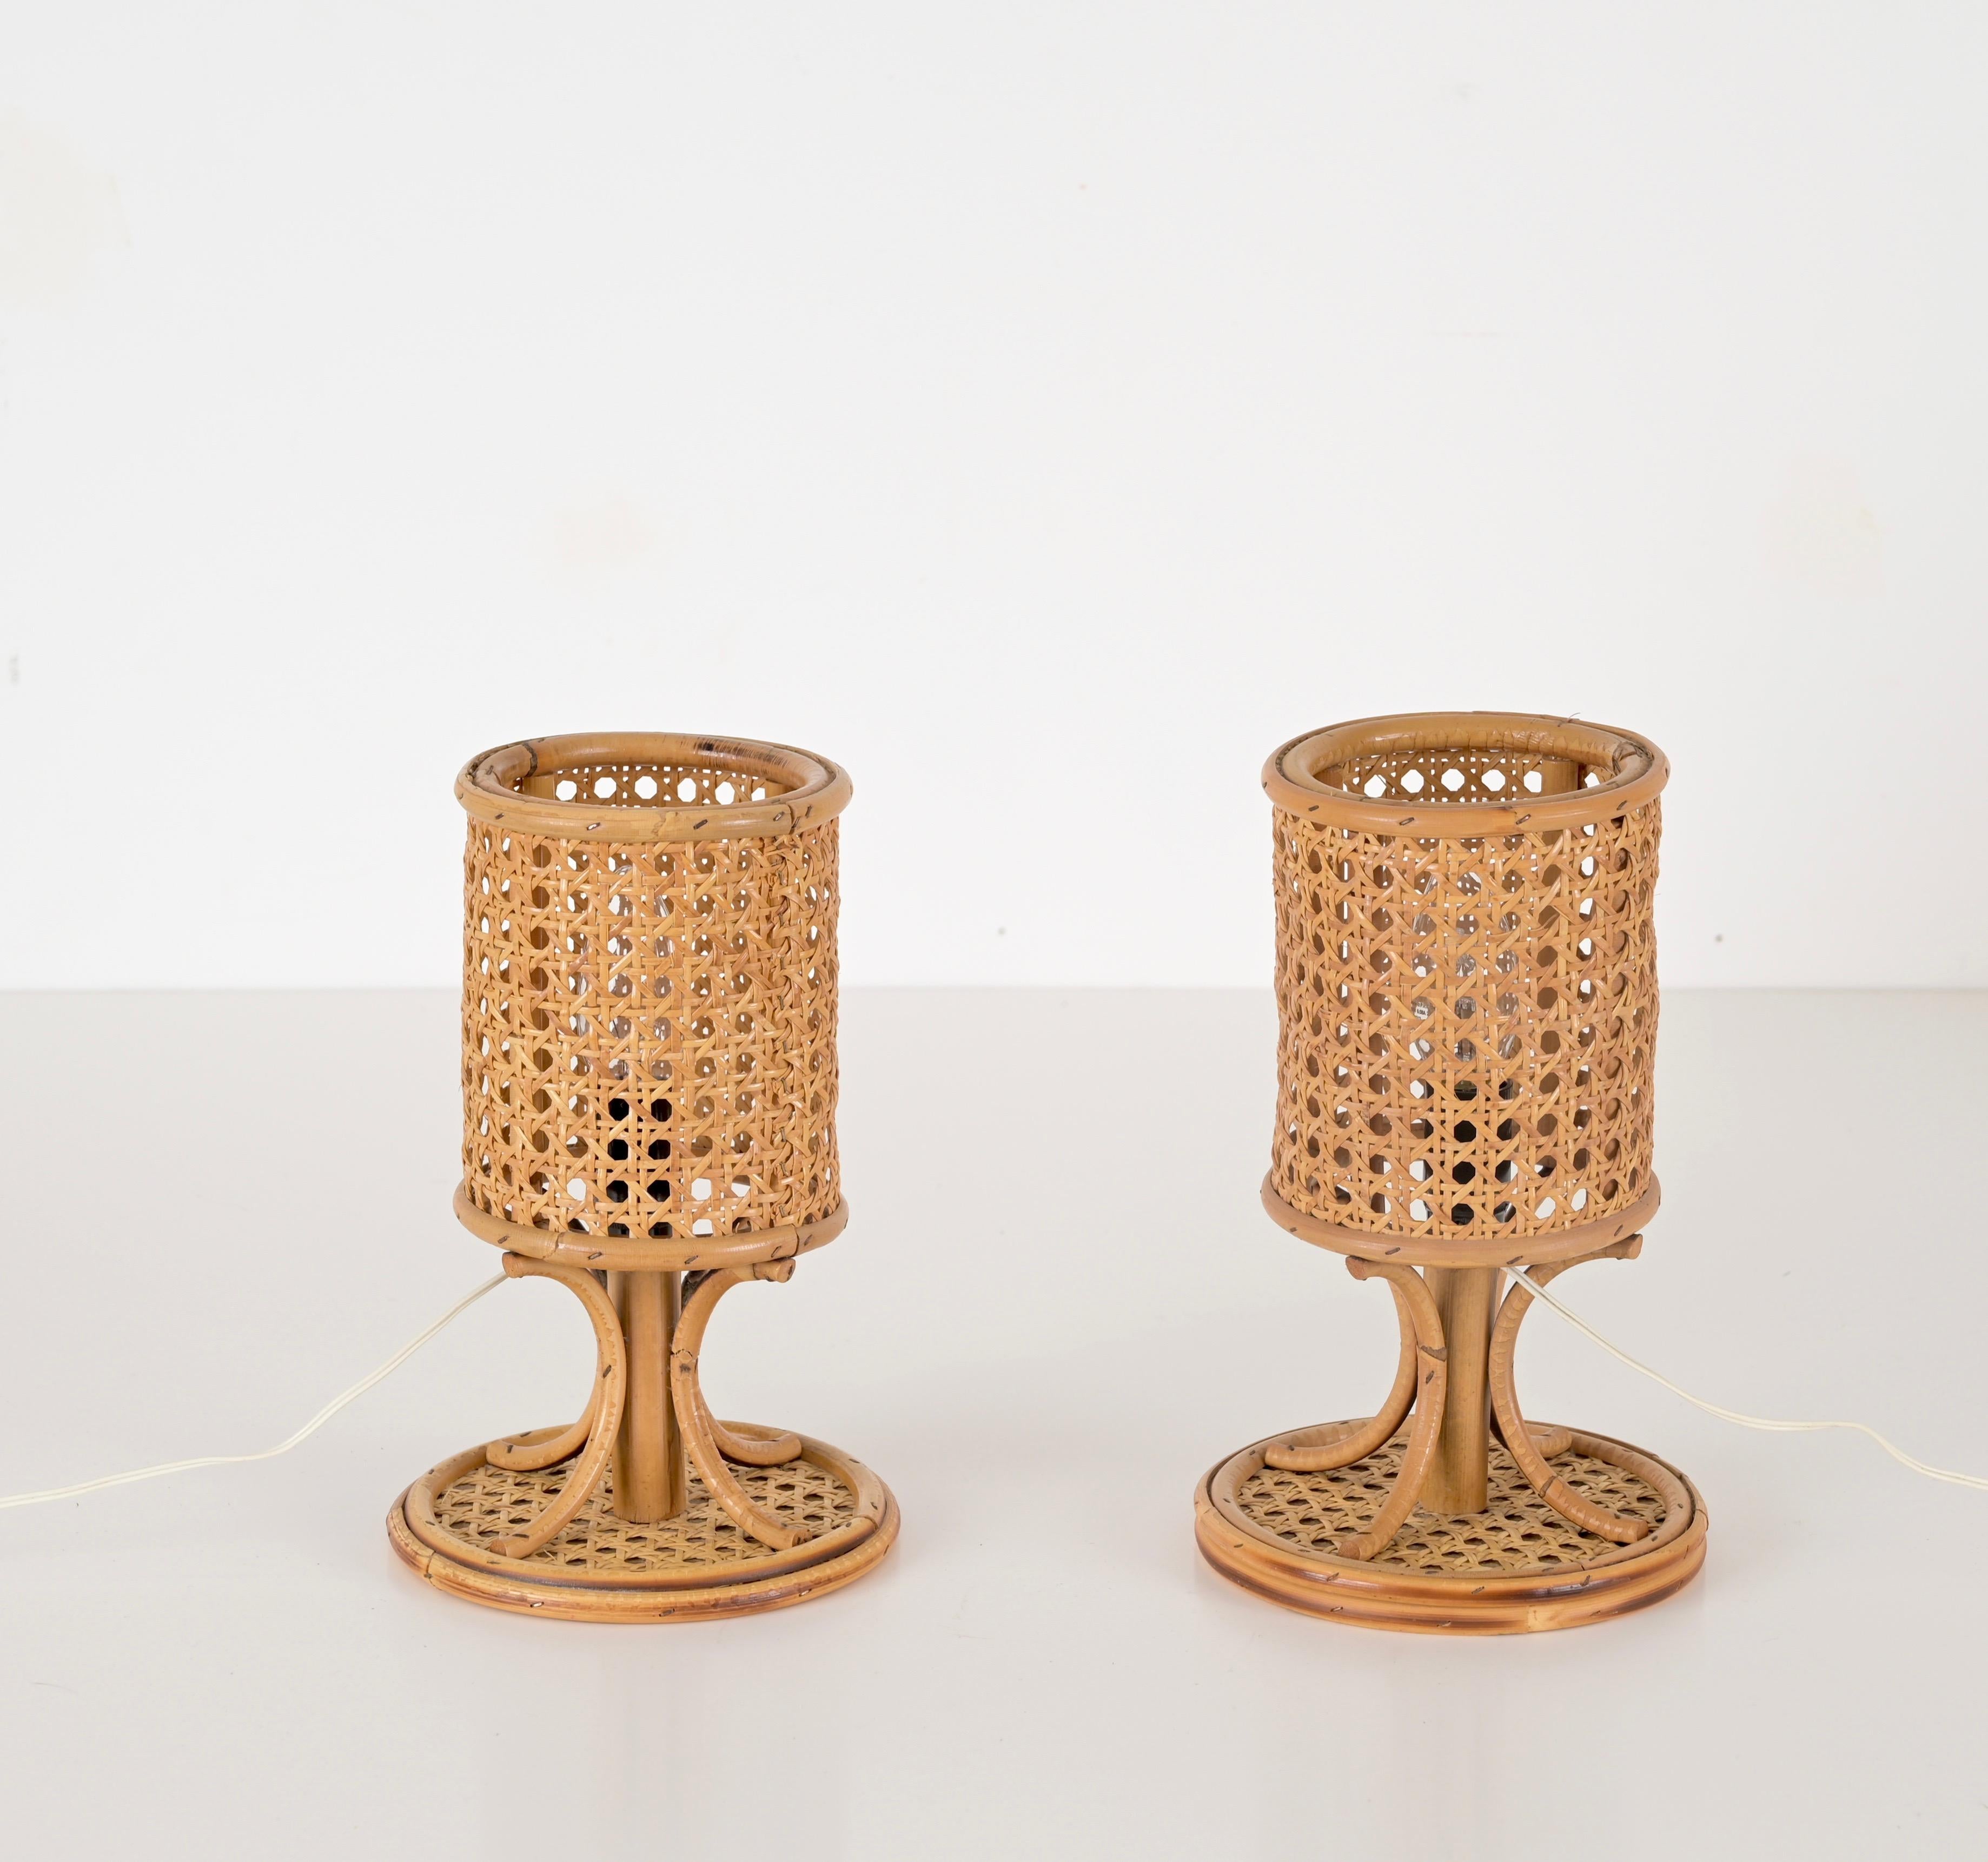 Louis Sognot Pair of Table Lamps in Rattan and Wicker, France 1960s For Sale 1